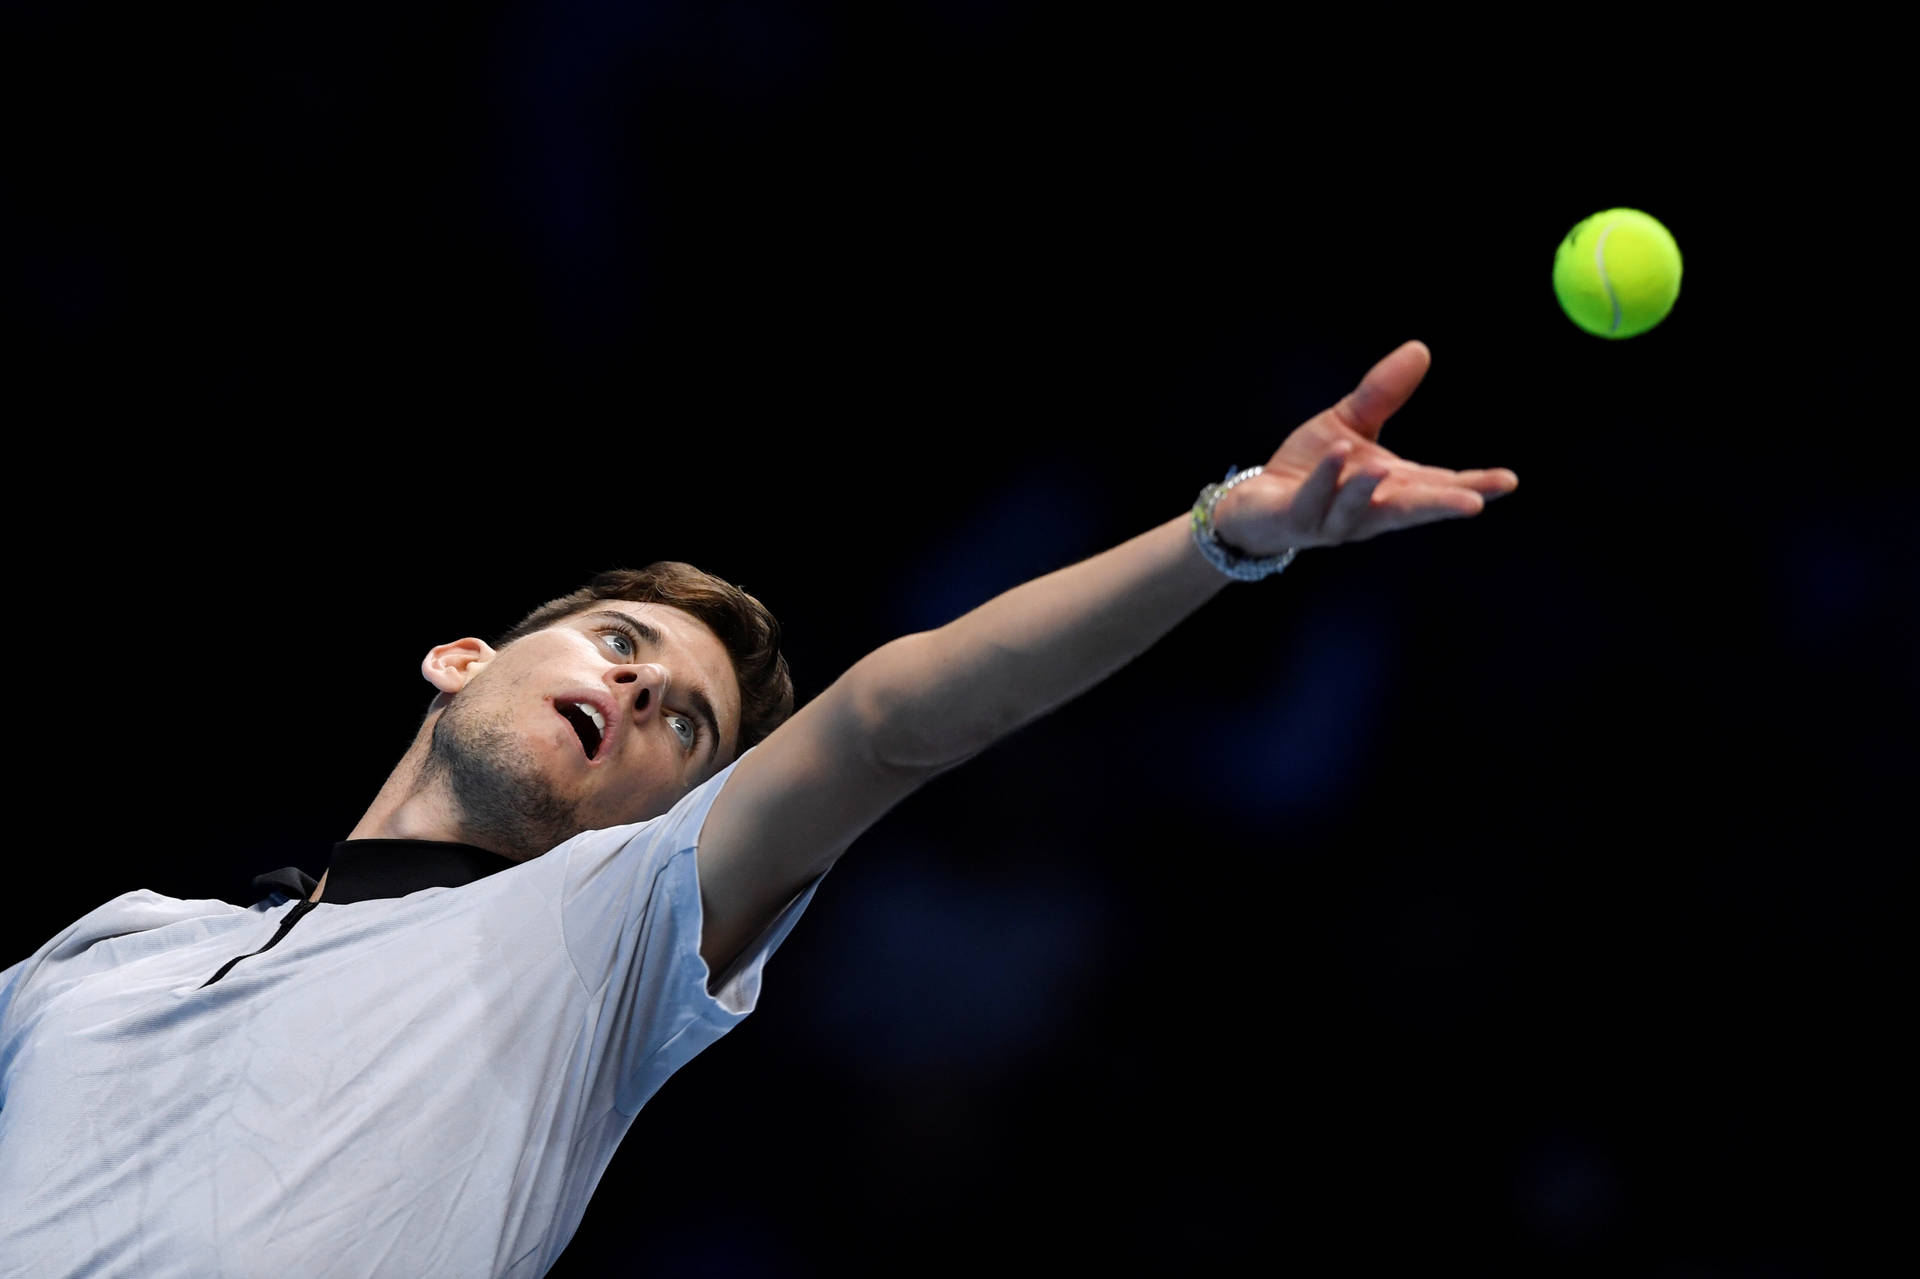 Caption: Professional Tennis Player Dominic Thiem In Action